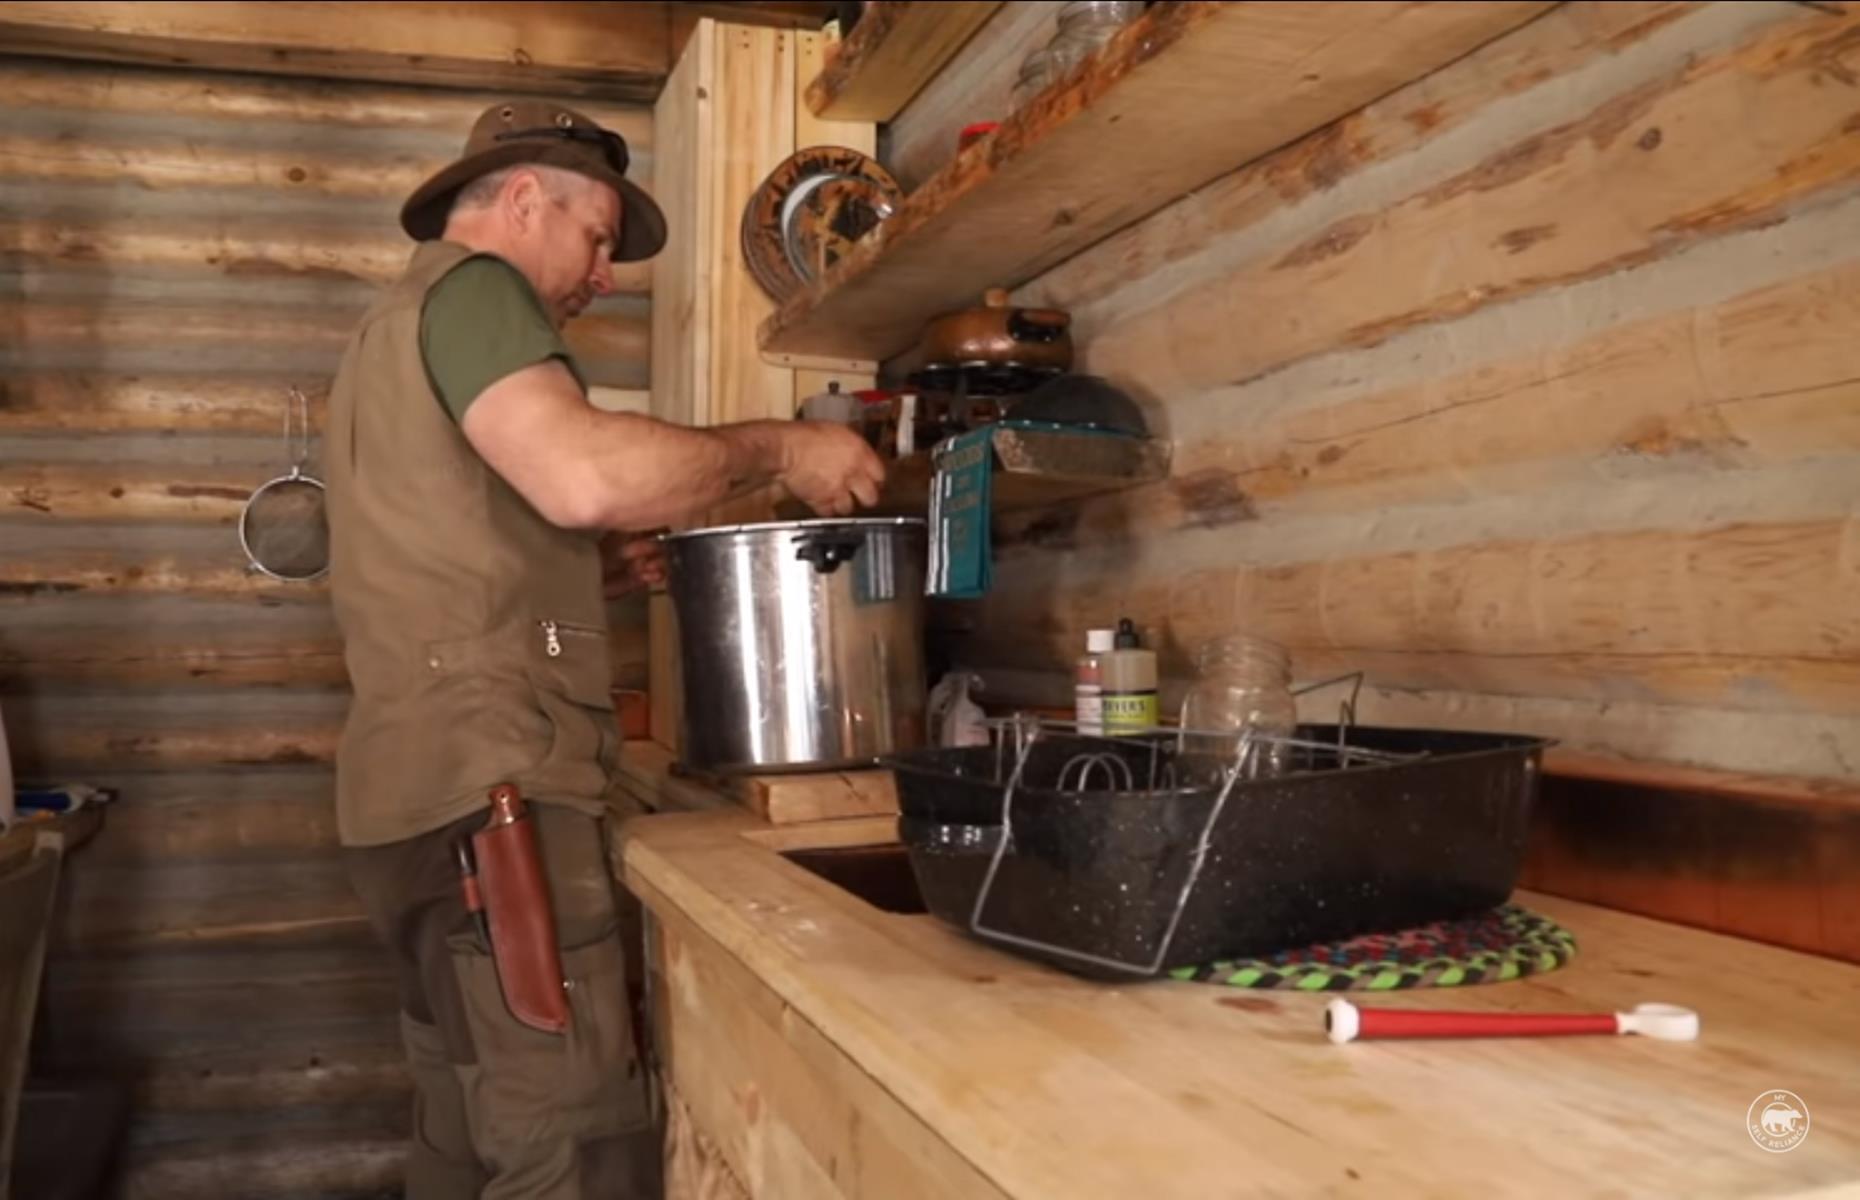 <p>Shawn harvests maple sap from the surrounding trees using metal 'spiles'. He has acquired a complex knowledge of the exact time and temperatures for the best harvest and says the sweet liquid can be drunk straight from the tree. He boils the sap down over an open fire to make his own maple syrup, which he then stores in jars.</p>